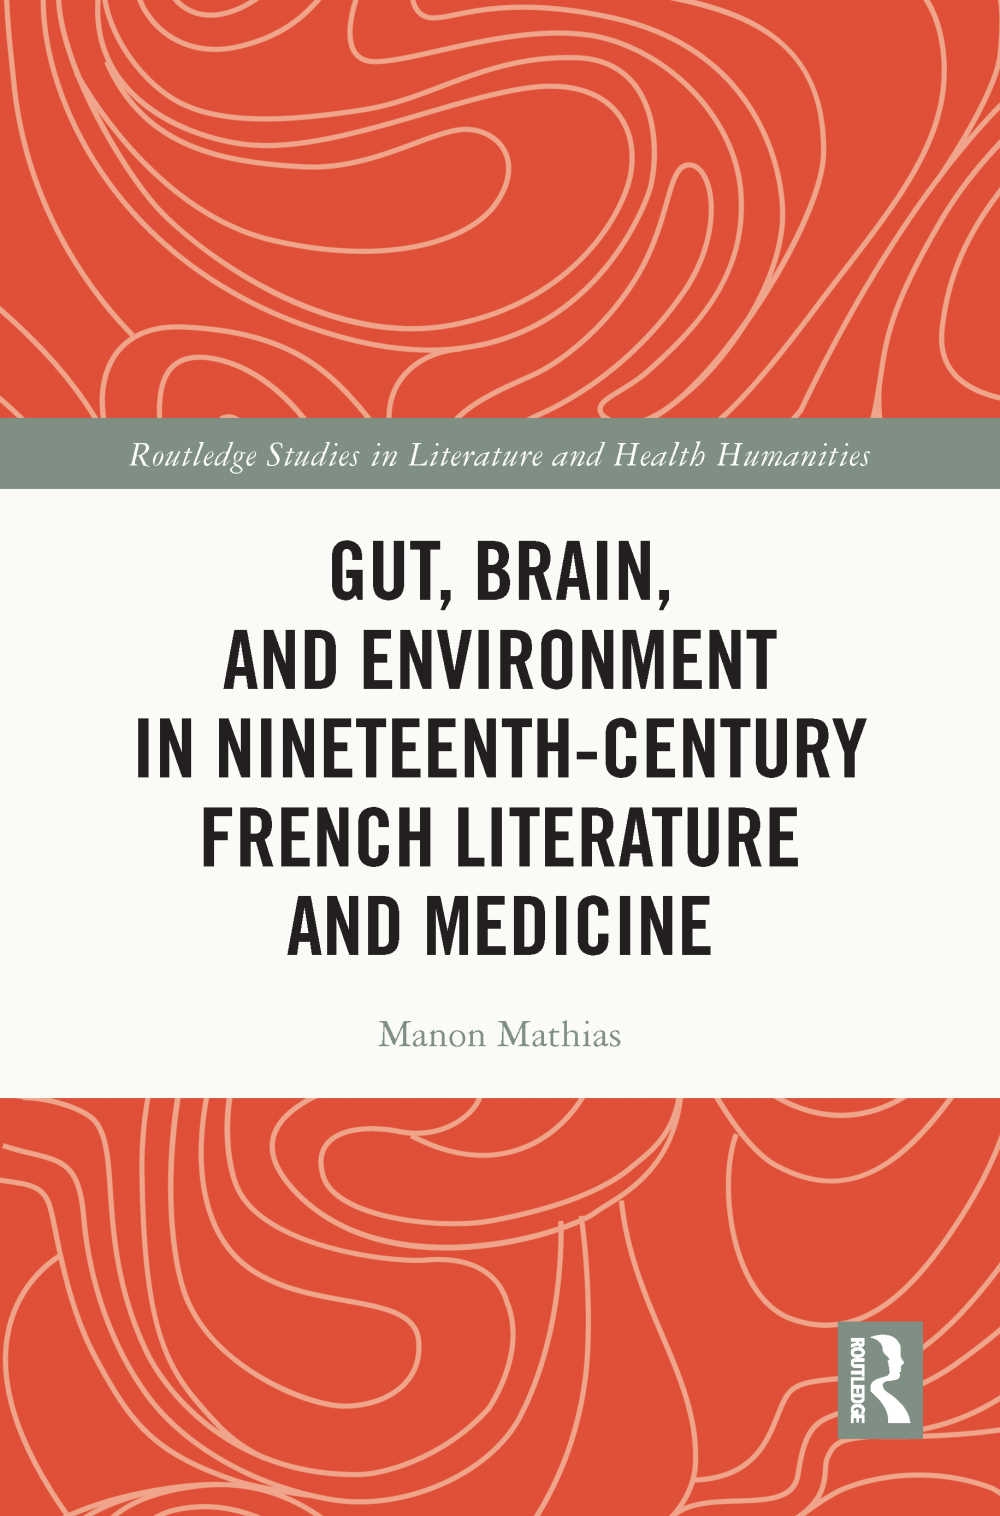 Gut, Brain, and Environment in Nineteenth Century French Literature and Medicine